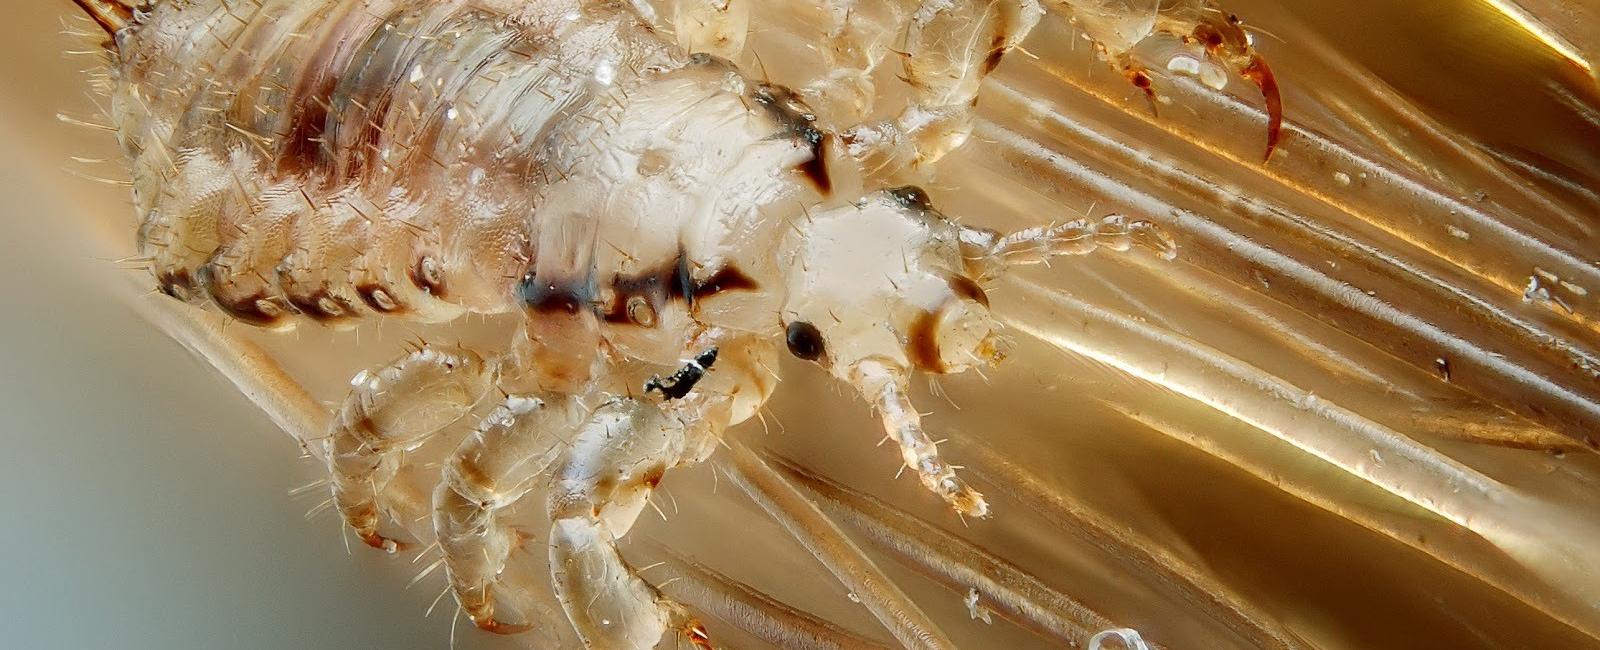 The sexually transmitted disease known as crabs is actually just pubic lice stuck inside the hair follicles of the genitalia